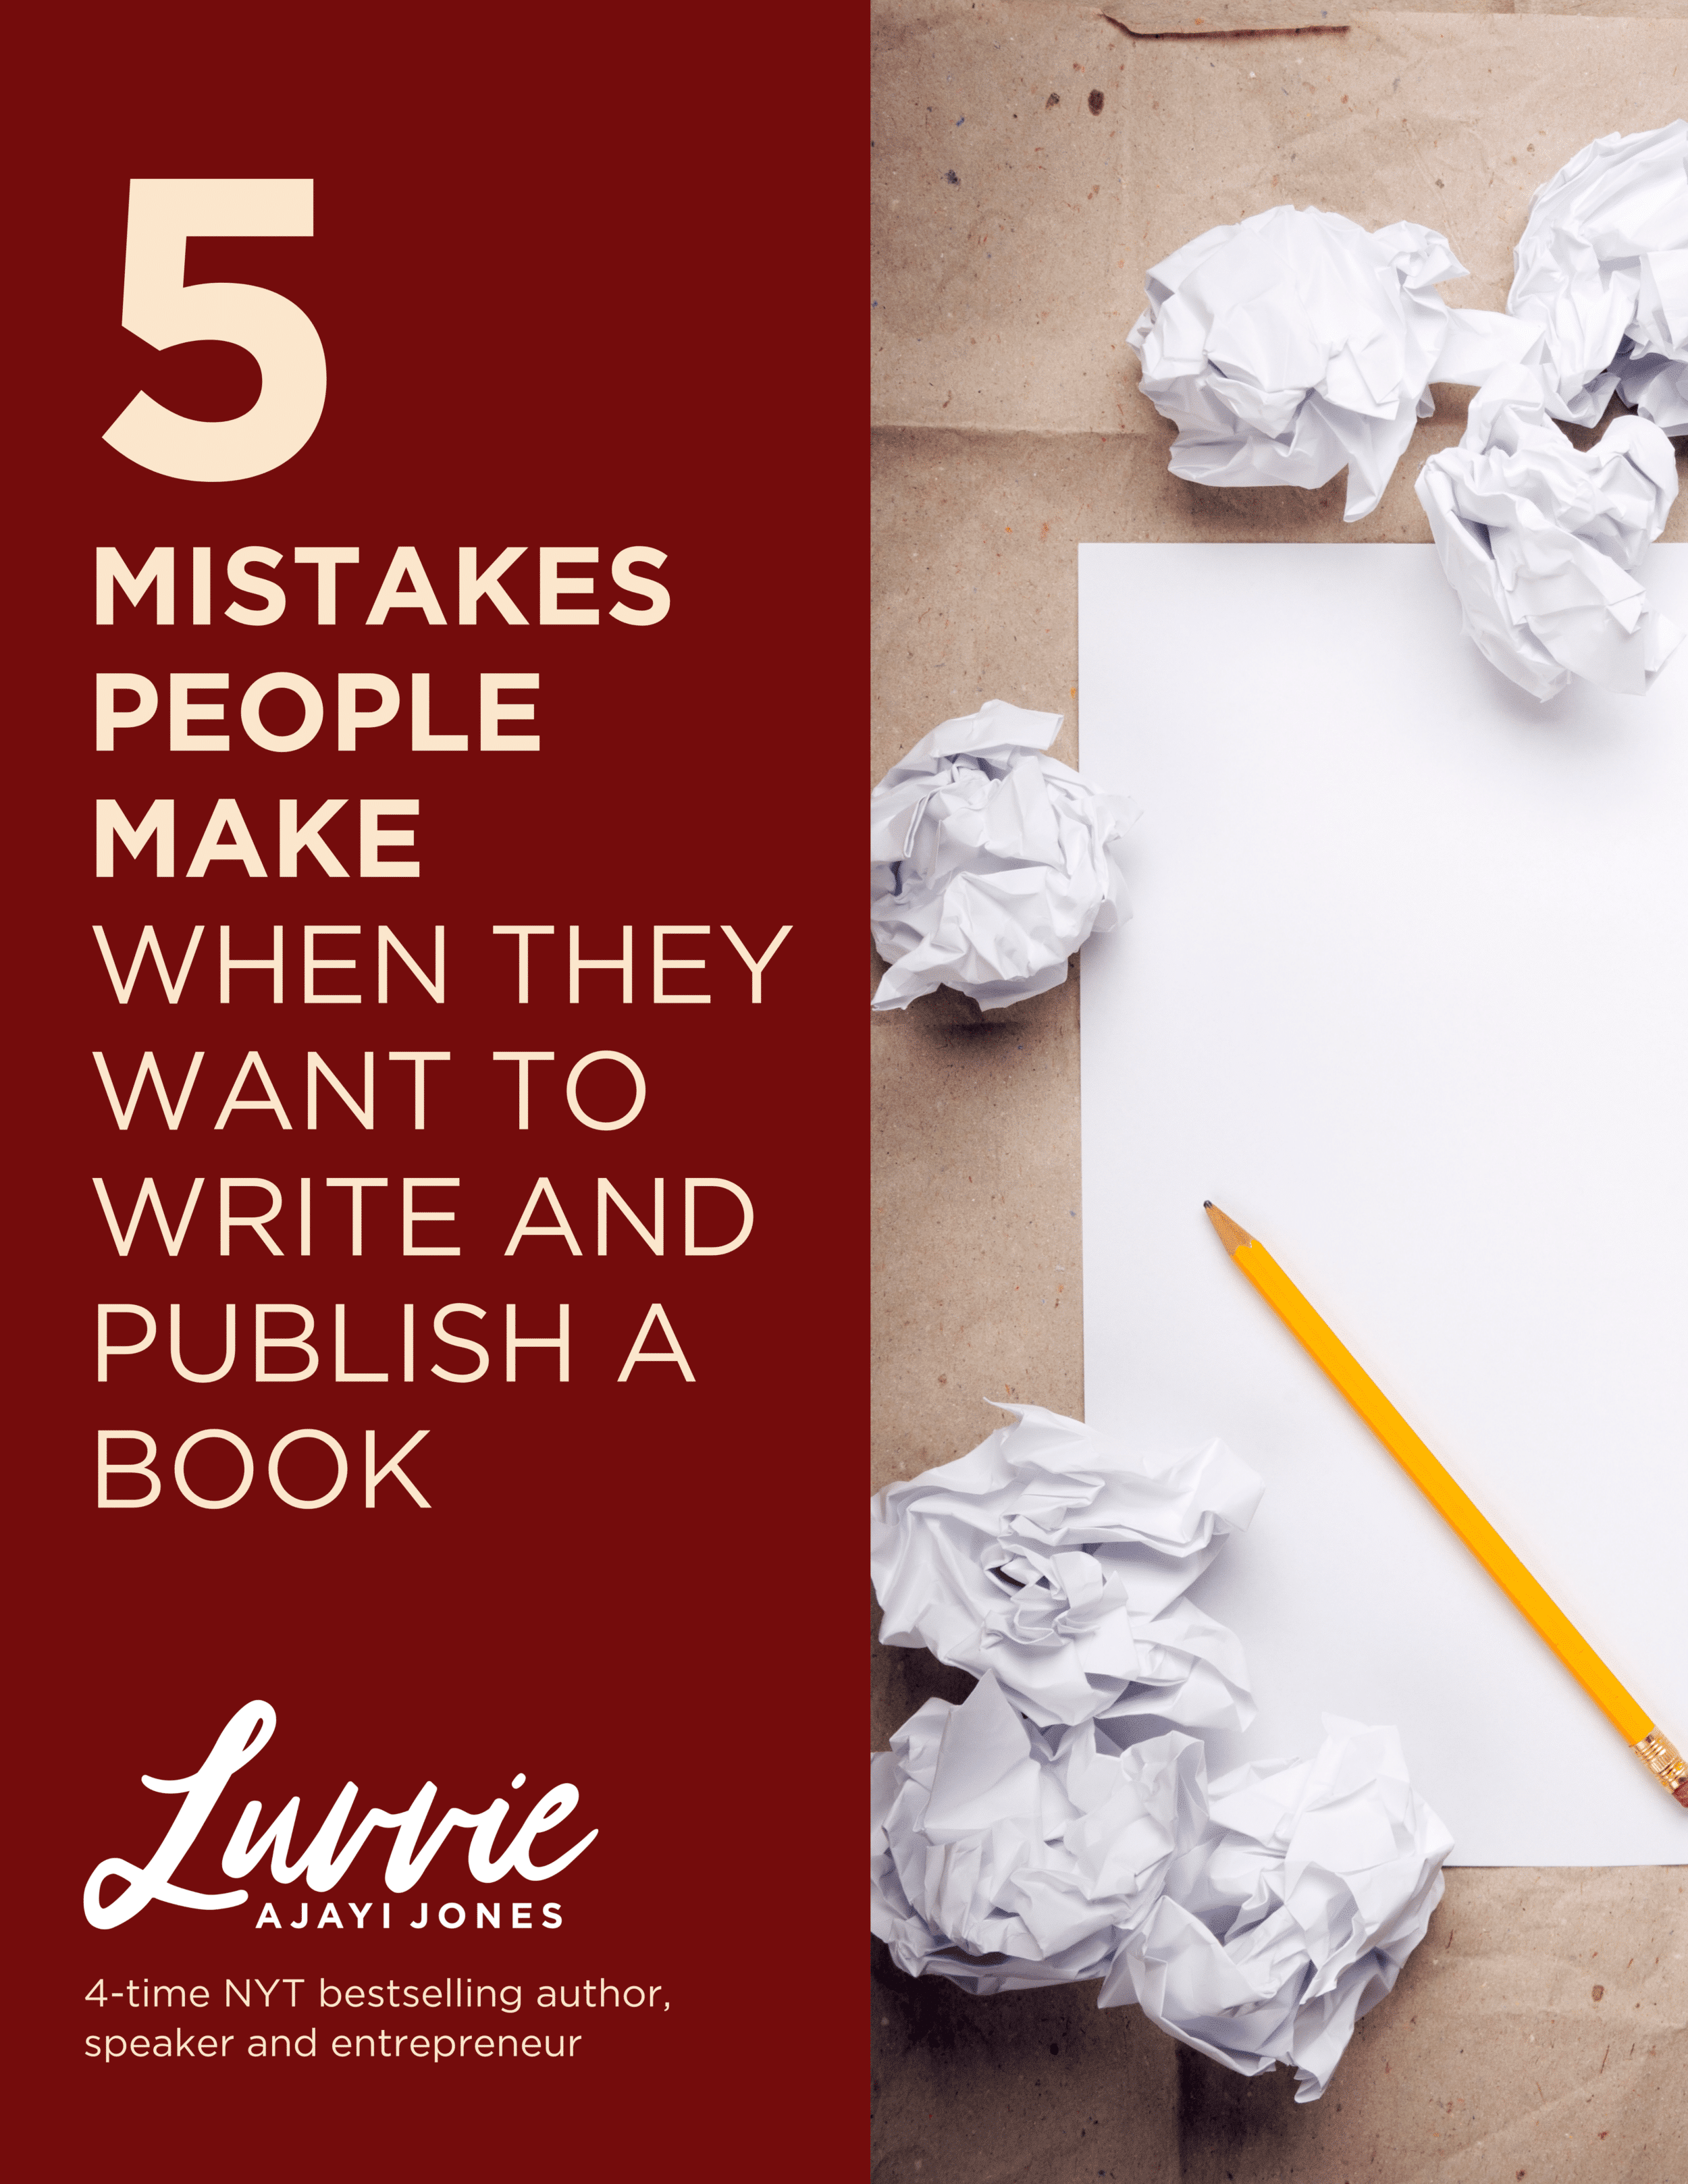 Cover of a book about common mistakes in writing and publishing